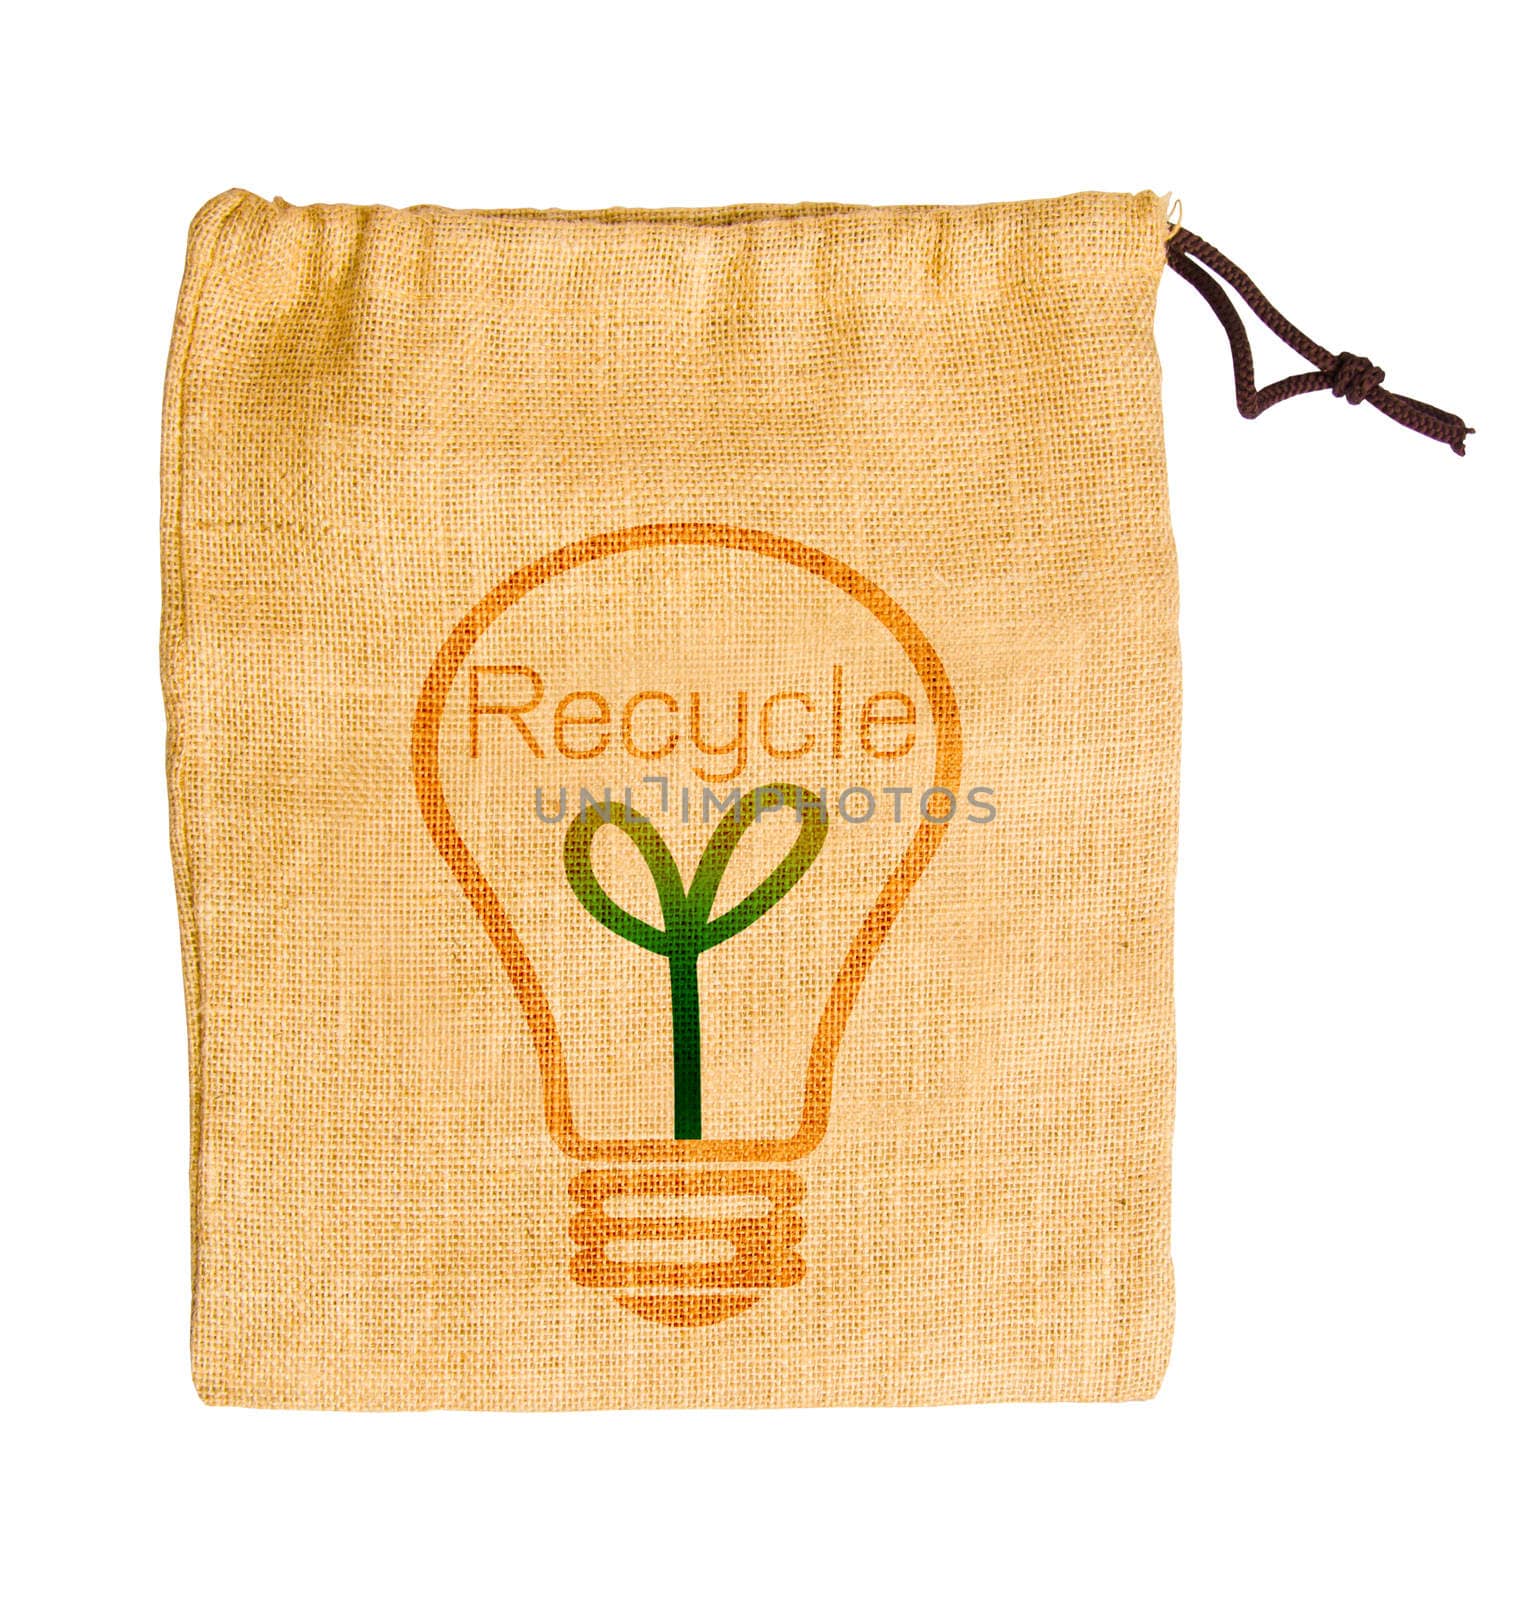 Empty sack bag with recycle concept. by Gamjai